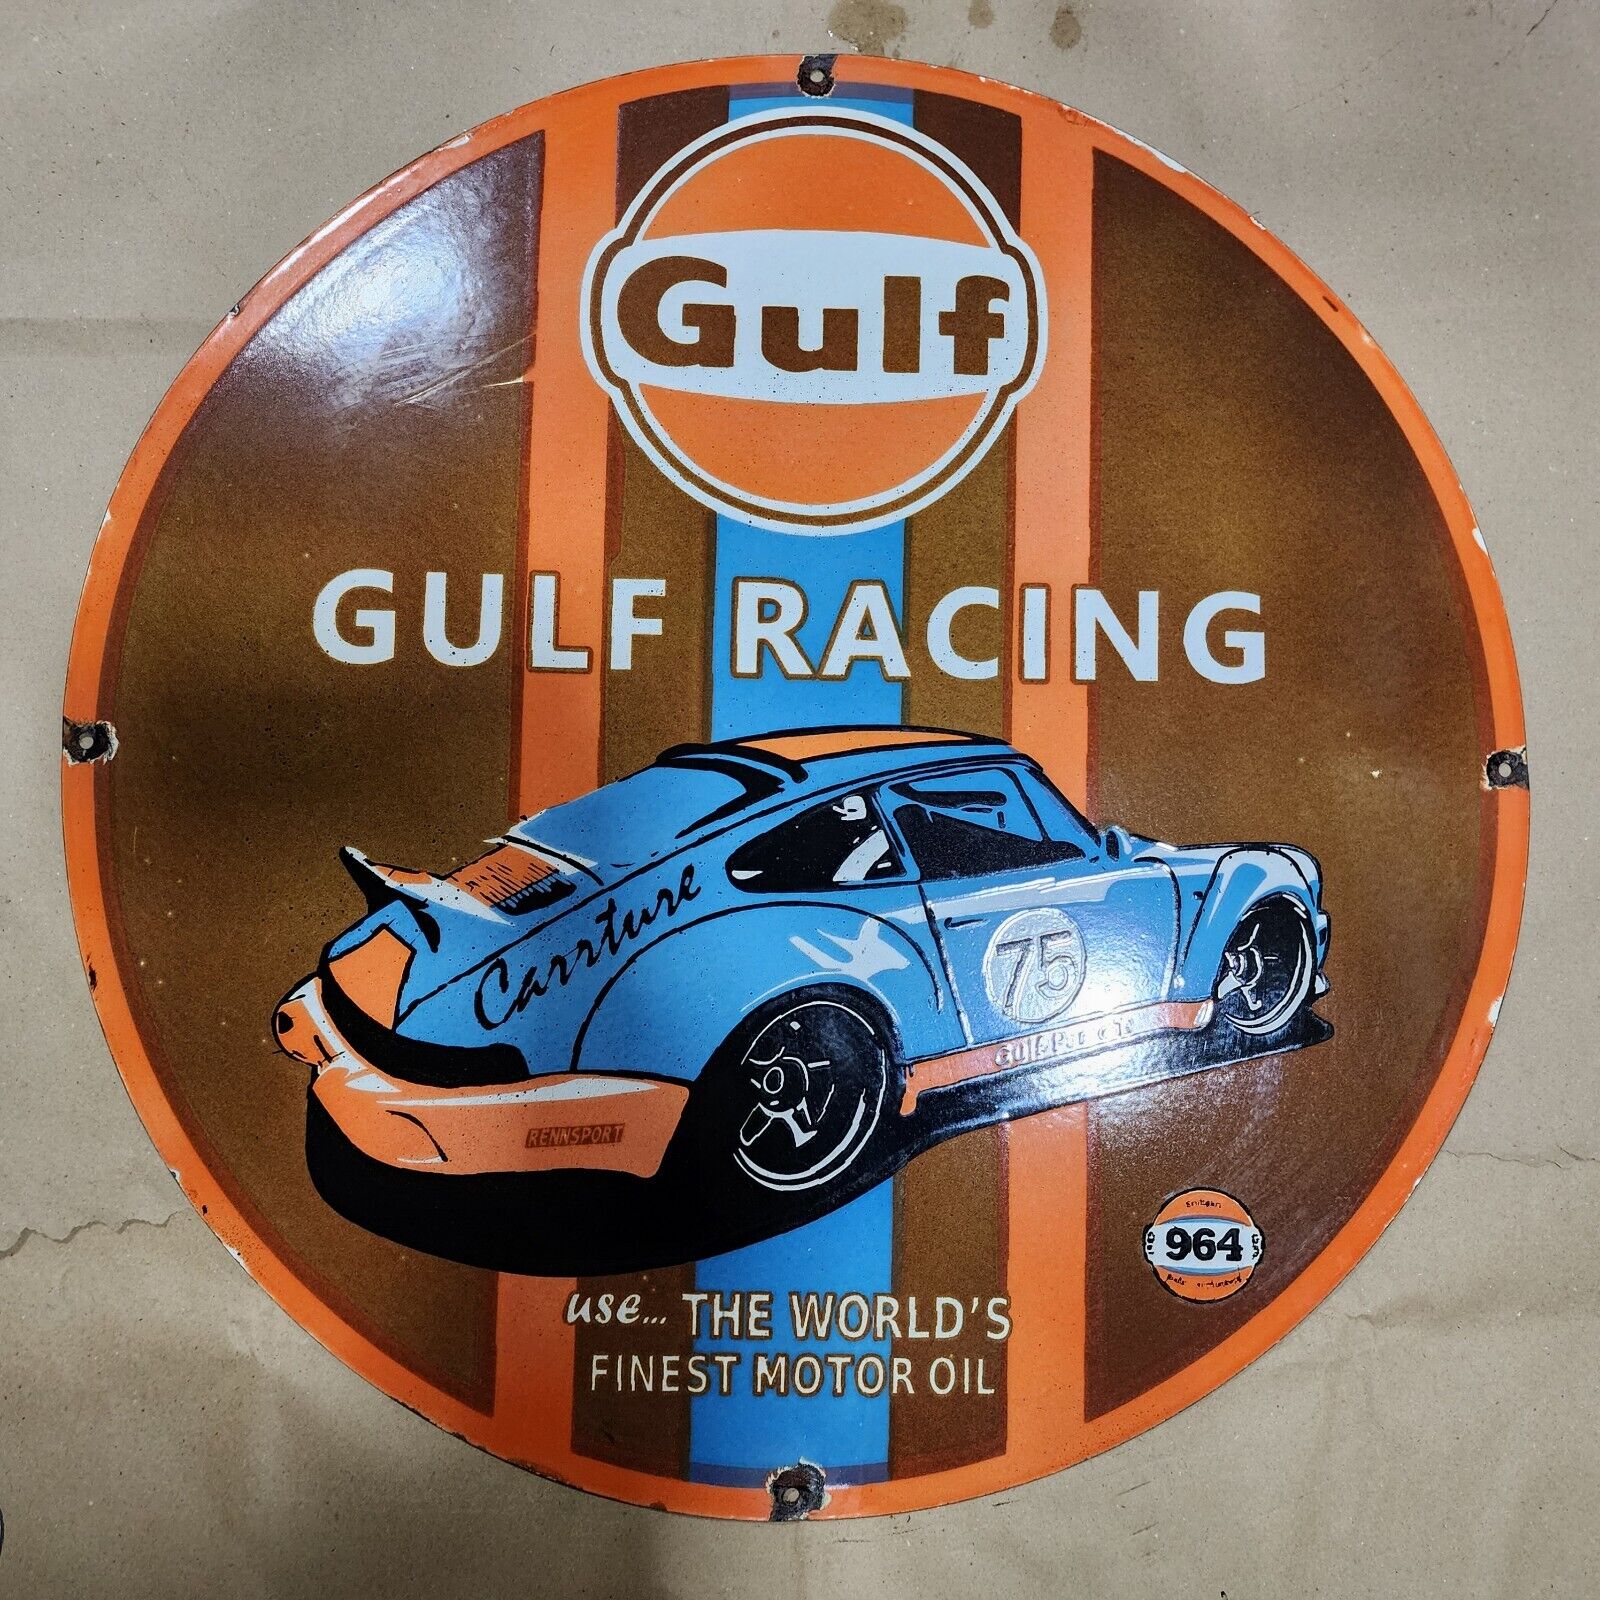 GULF RACING PORCELAIN ENAMEL SIGN 30 INCHES ROUND